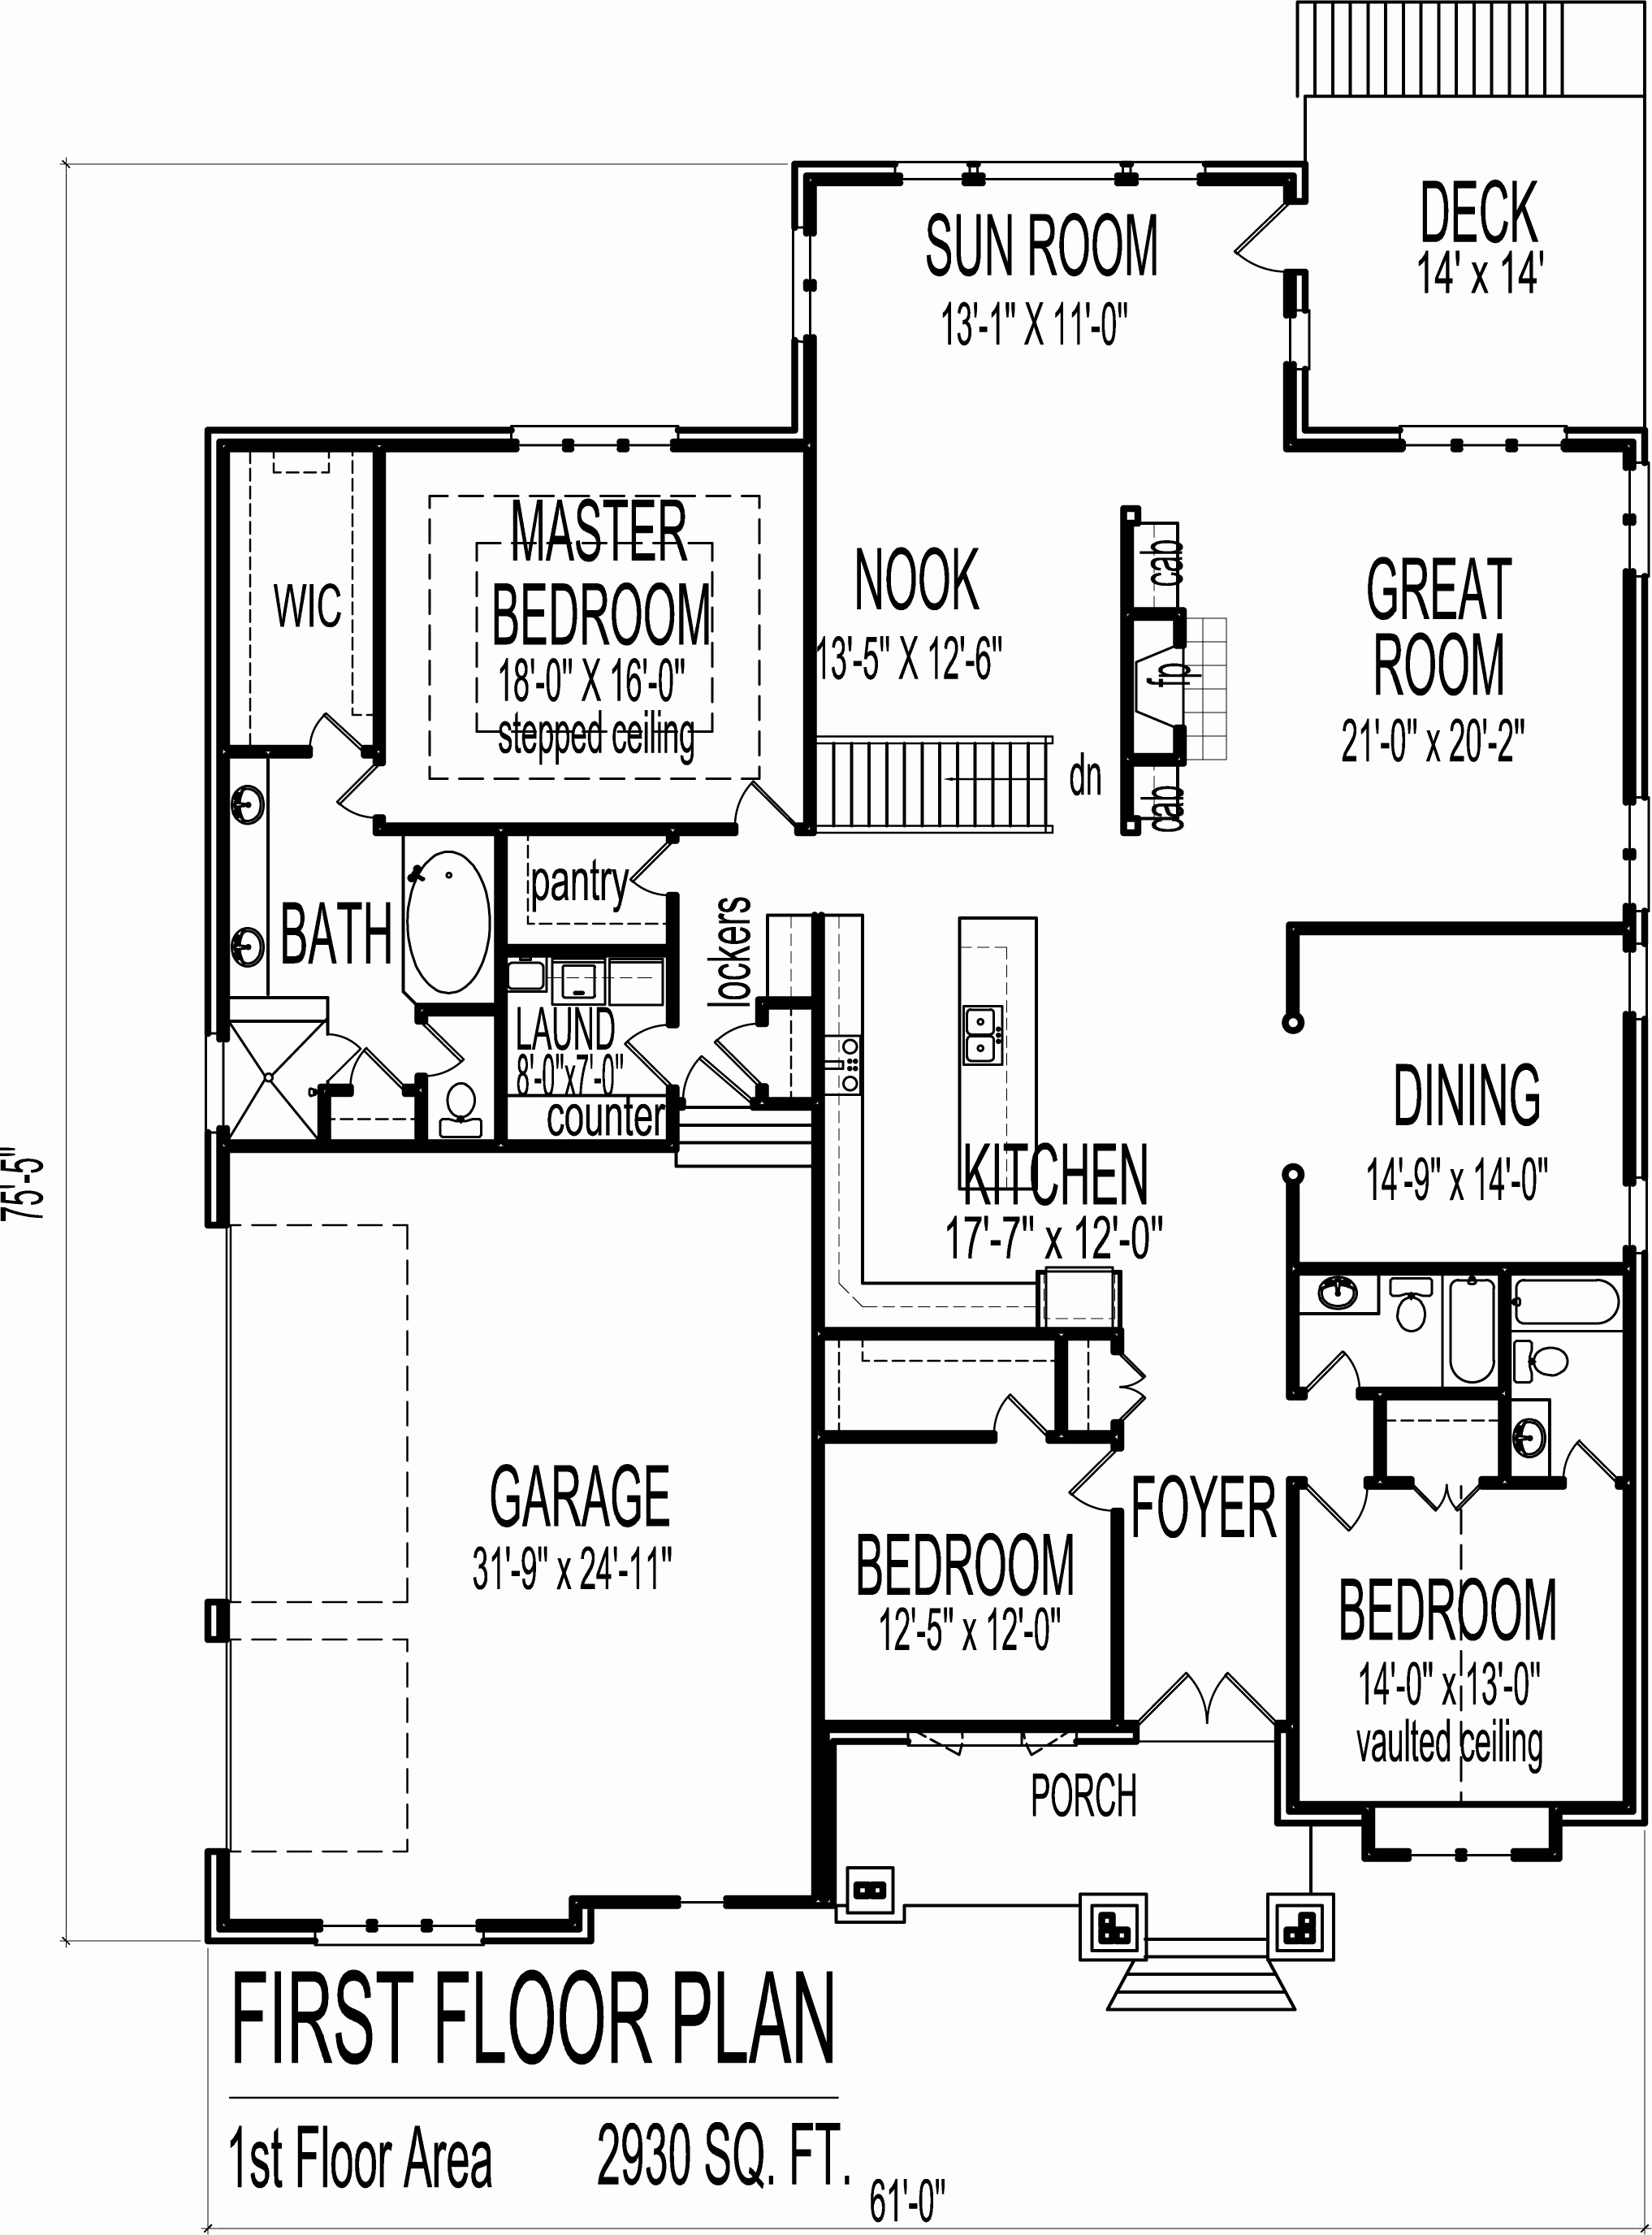 House Site Plan Drawing at GetDrawings Free download